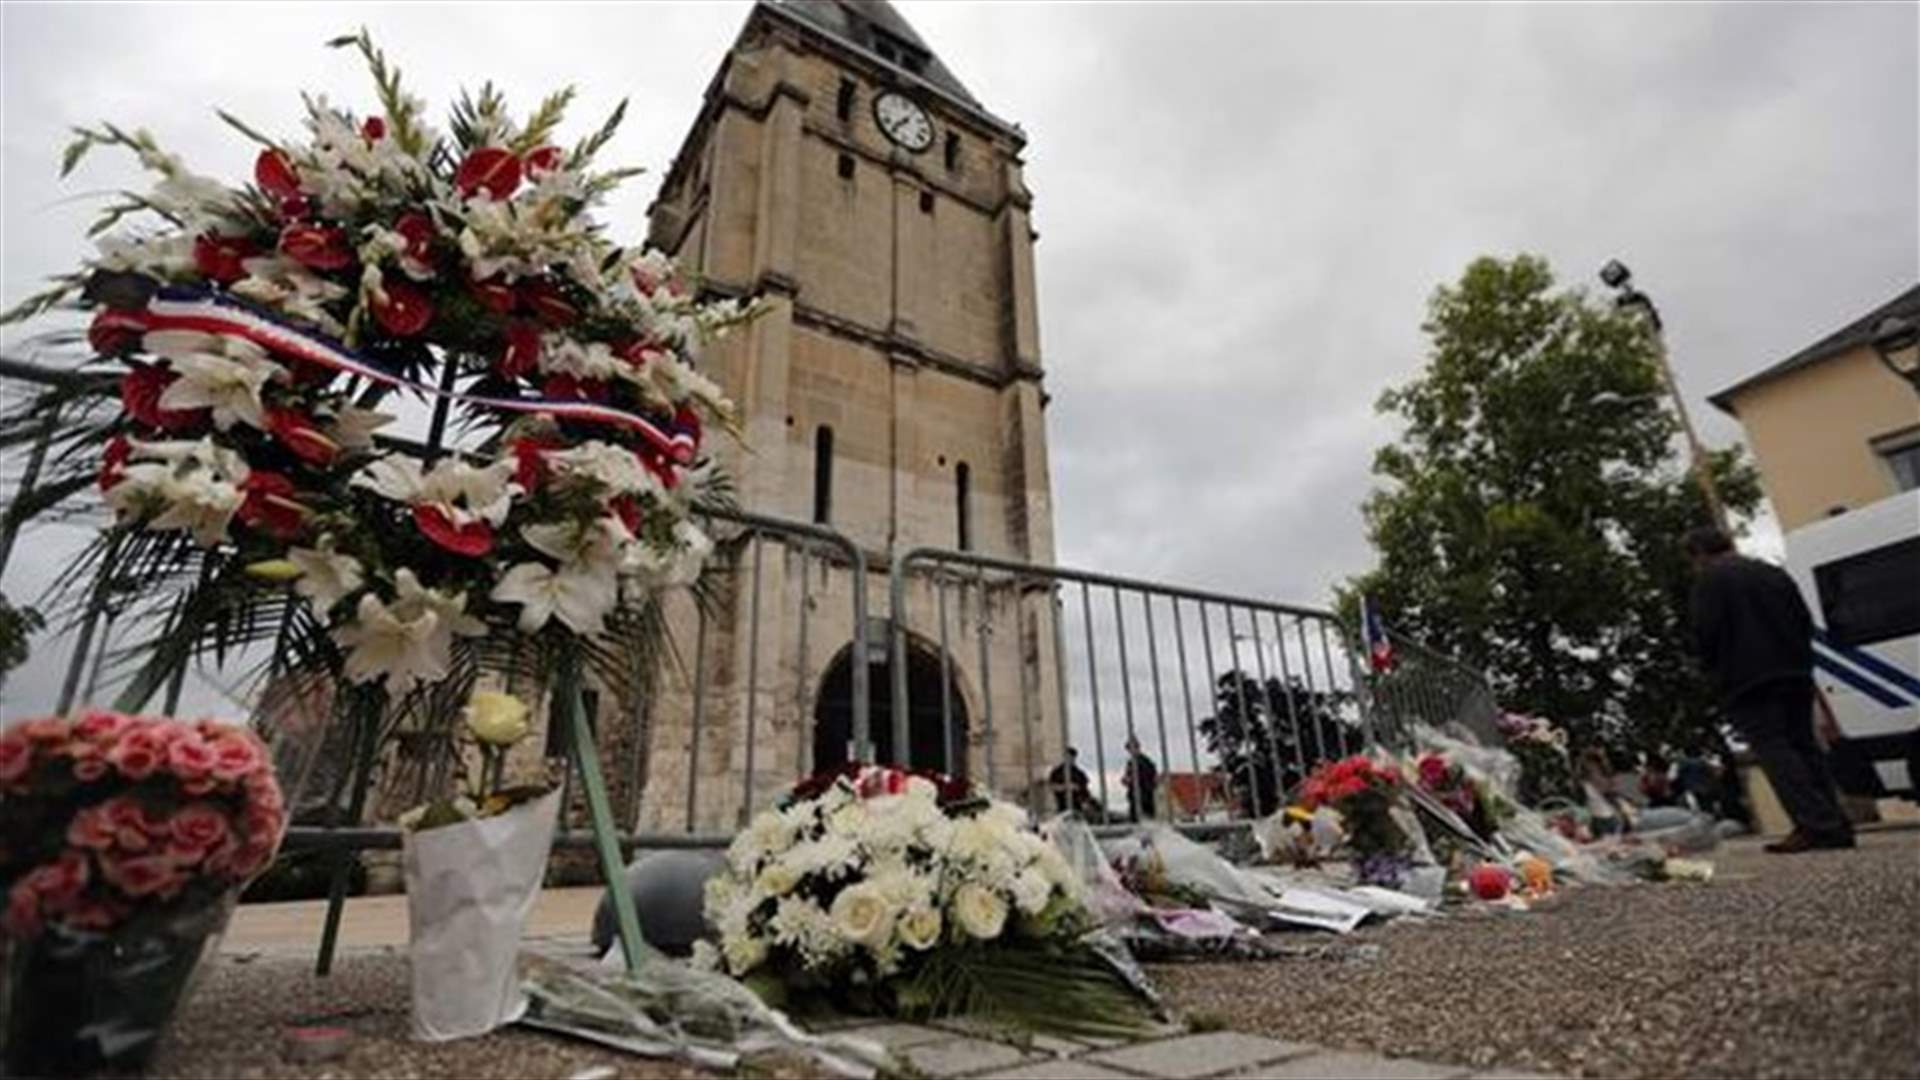 French identify second church attacker from DNA